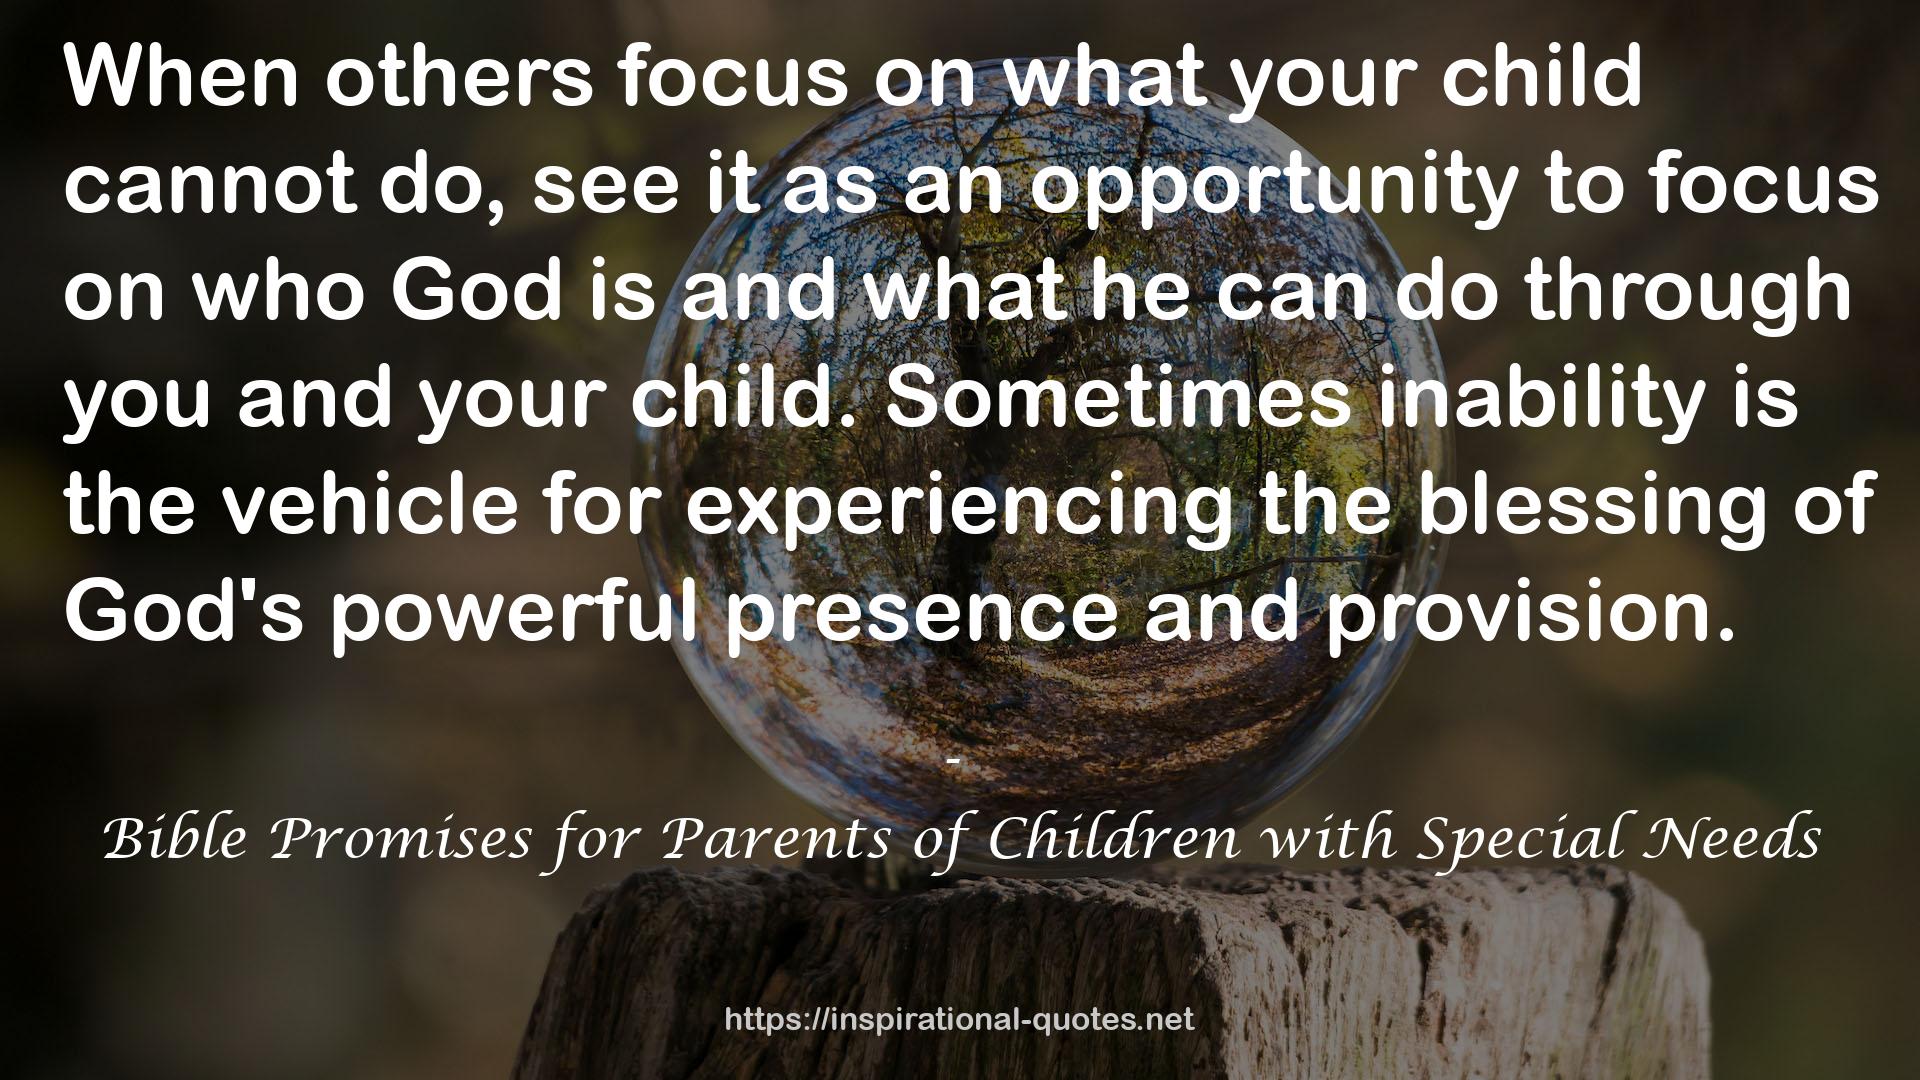 Bible Promises for Parents of Children with Special Needs QUOTES